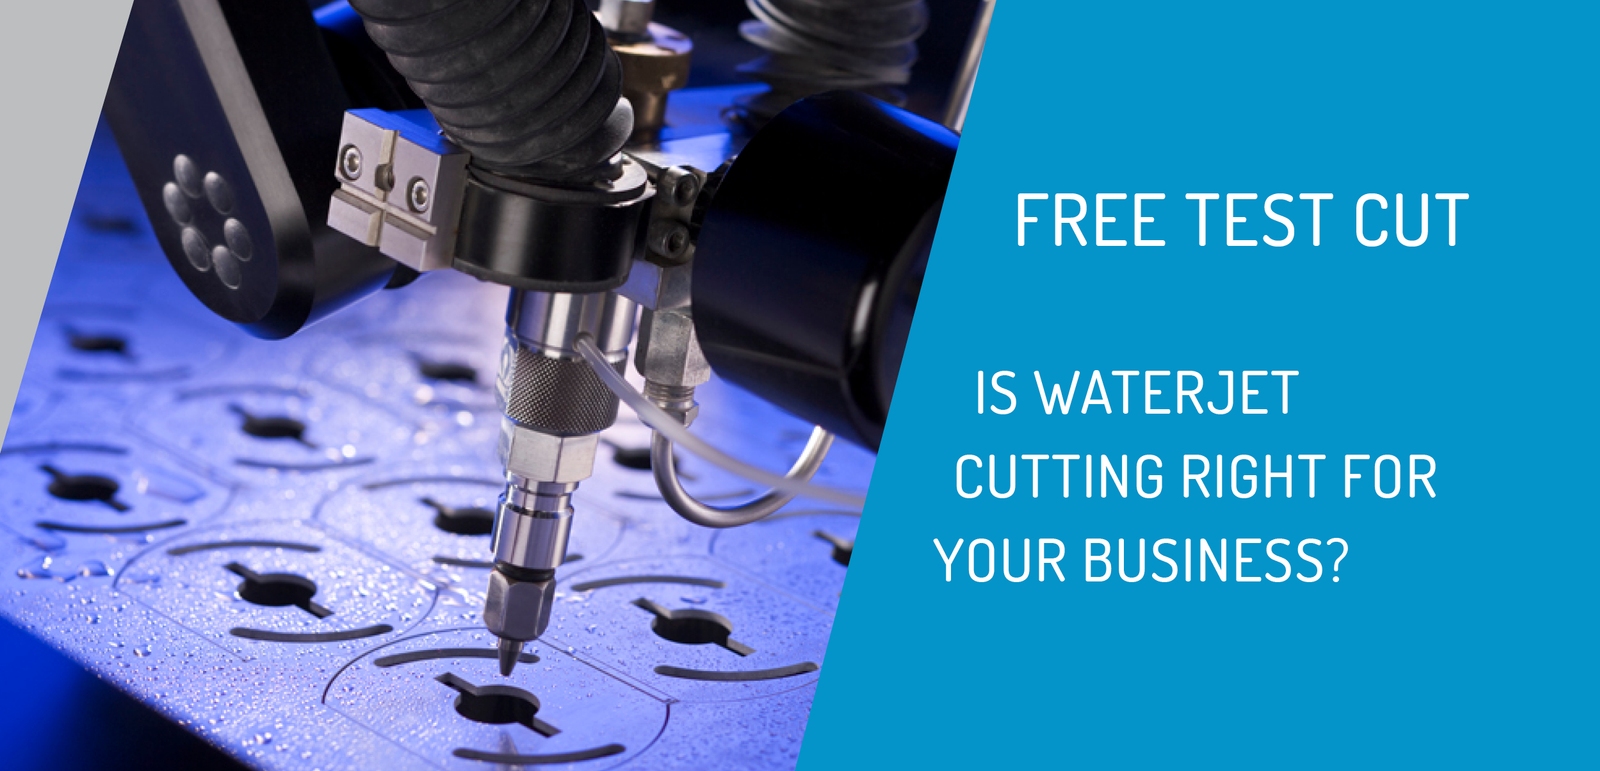 Free Test Cut | Is waterjet cutting right for your business?